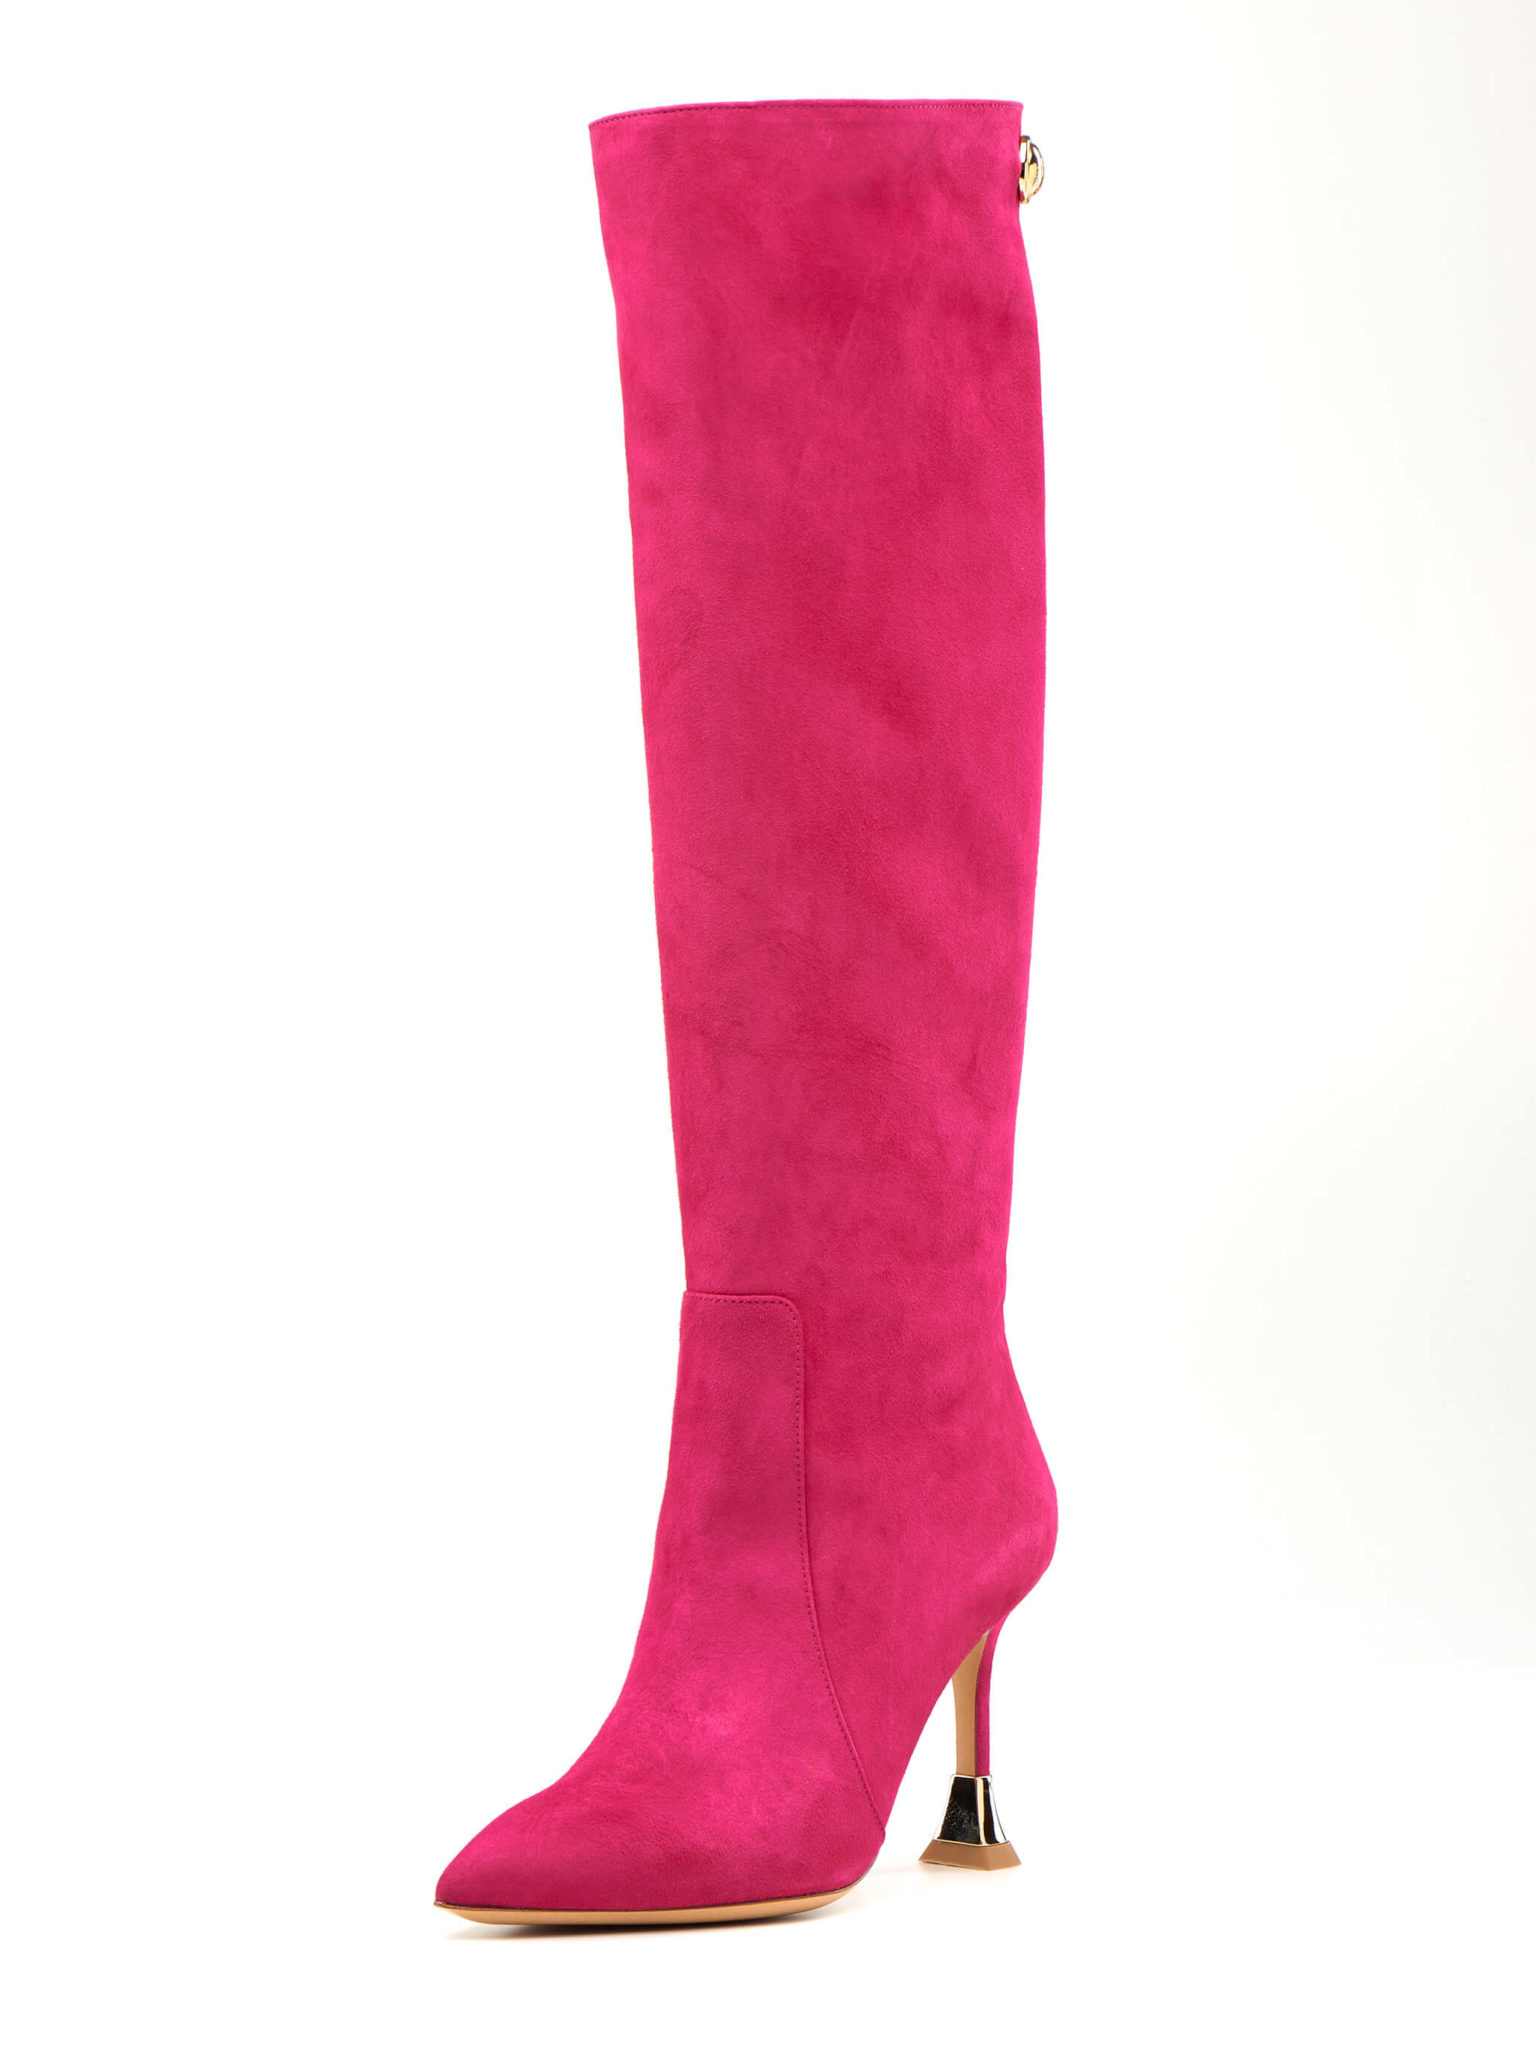 Fuchsia Pink Suede Knee High Boots -Luis Onofre Portuguese Shoes FW22